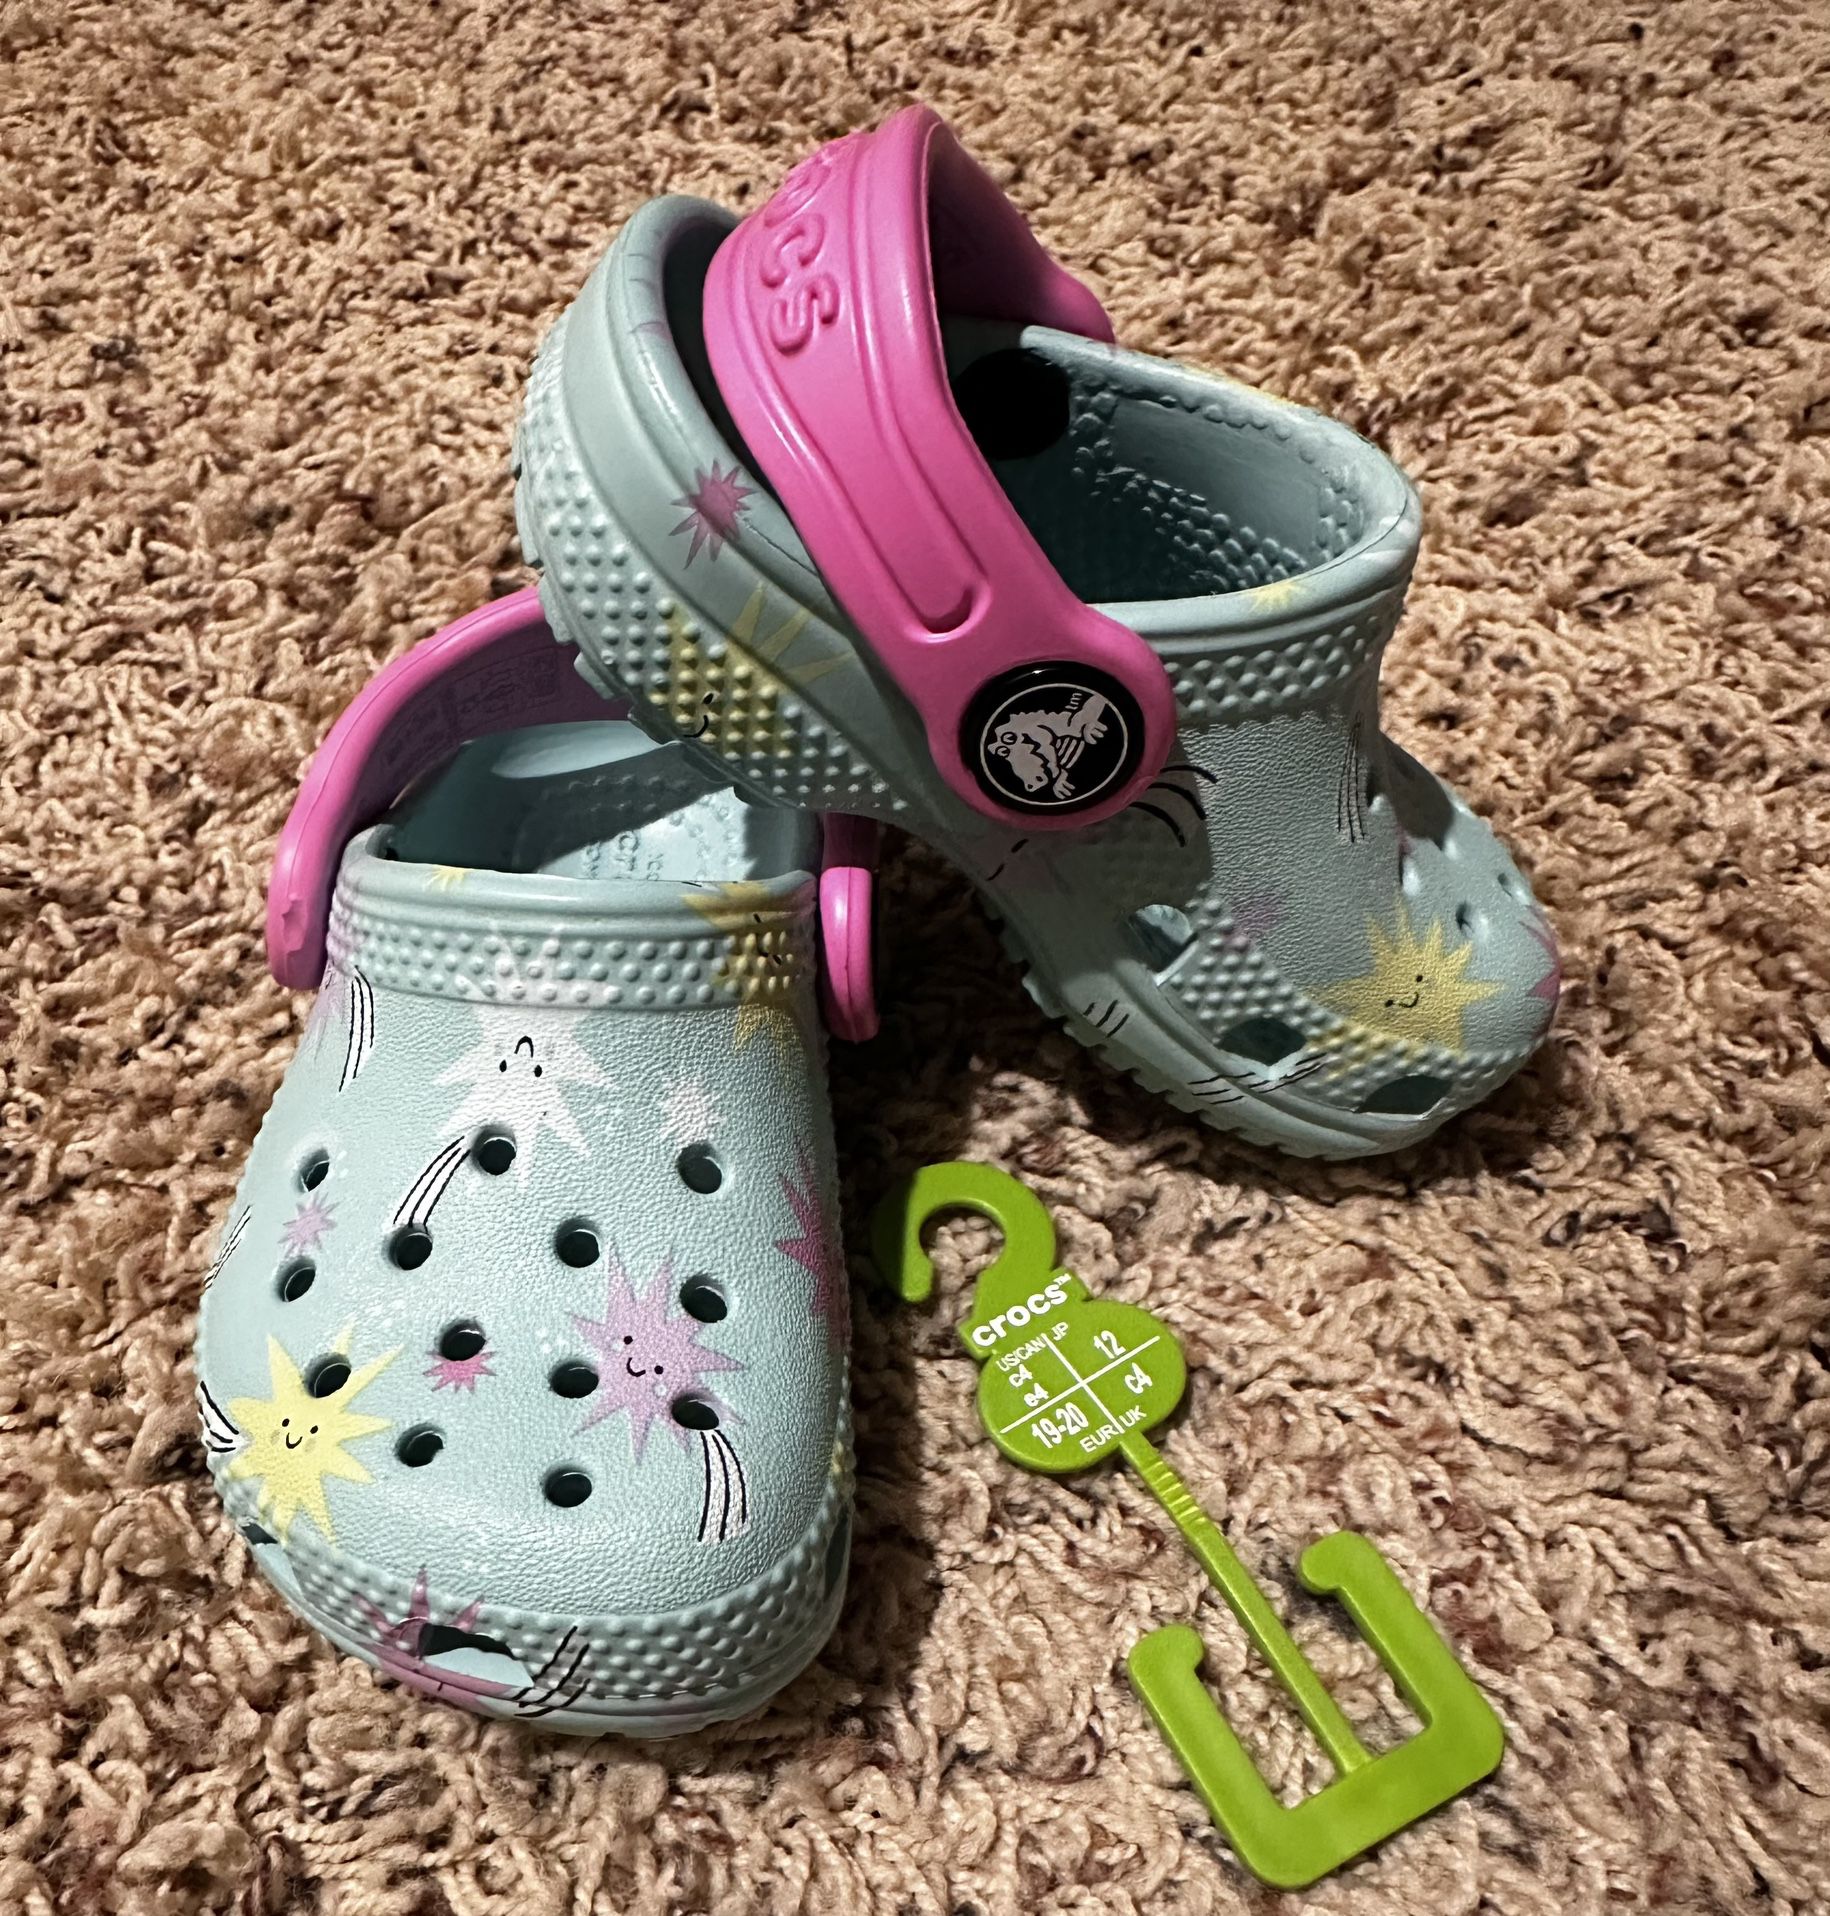 Crocs 4c New for Sale in Ceres, CA OfferUp